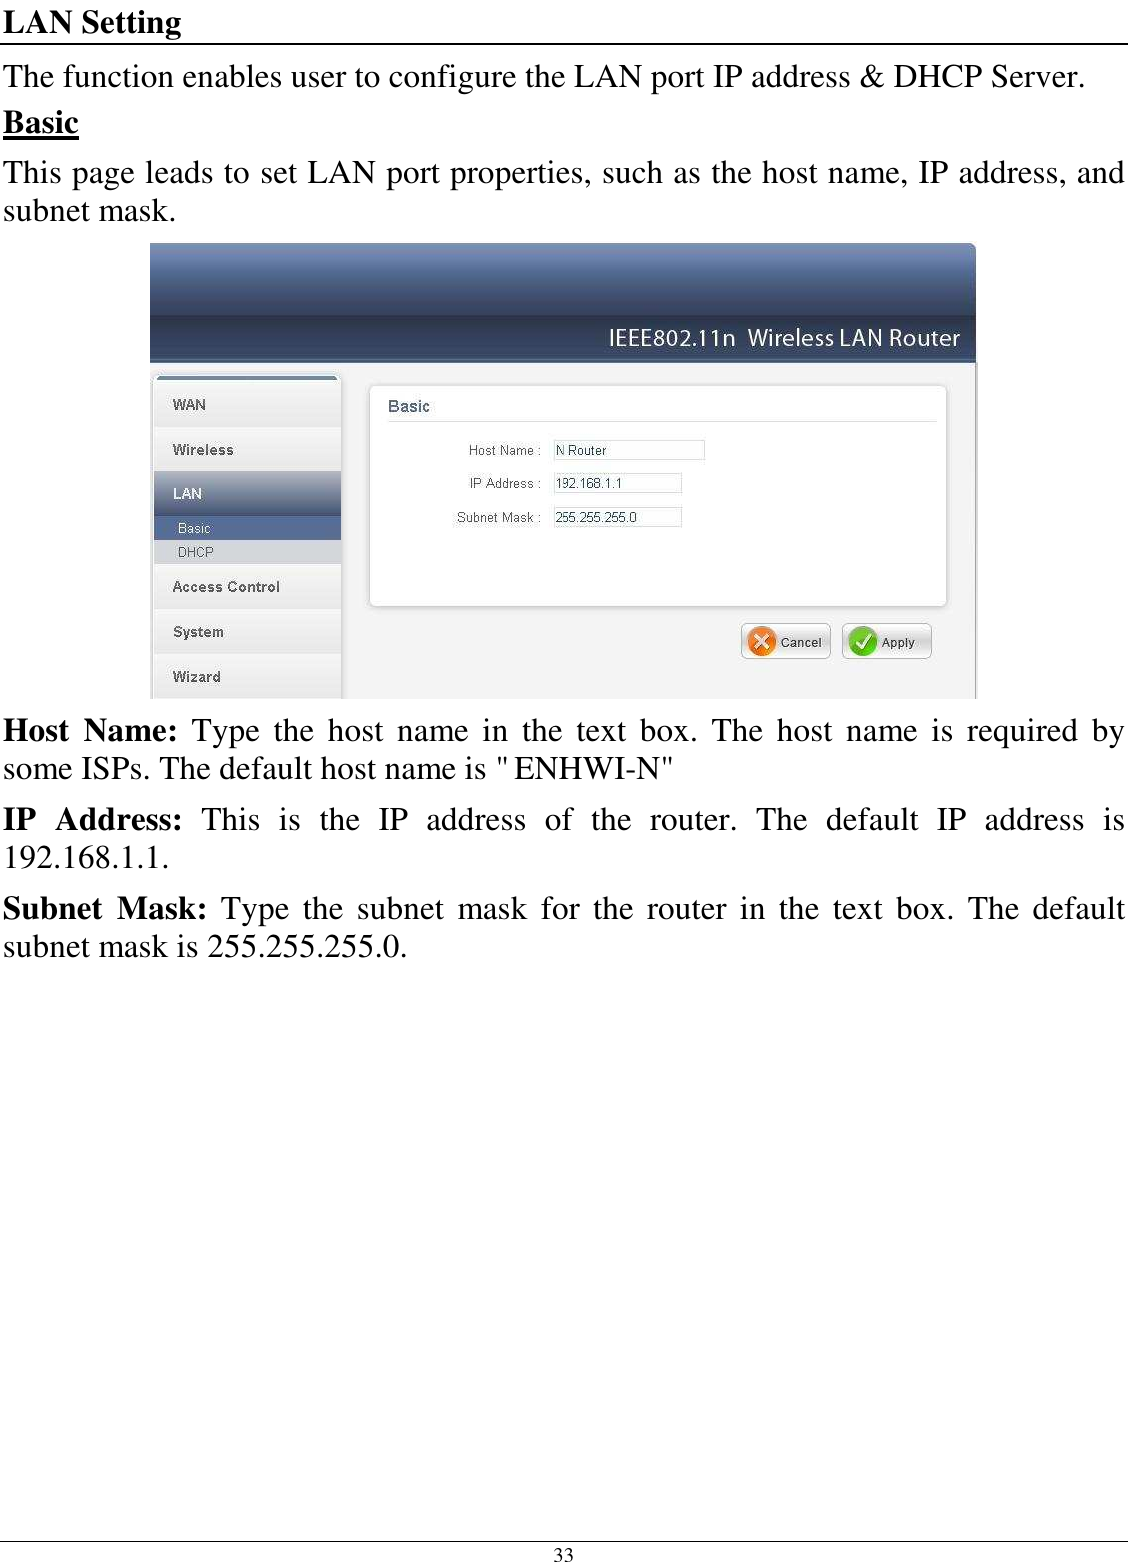 33 LAN Setting The function enables user to configure the LAN port IP address &amp; DHCP Server. Basic This page leads to set LAN port properties, such as the host name, IP address, and subnet mask.  Host  Name:  Type  the  host  name  in  the  text  box.  The  host  name  is  required  by some ISPs. The default host name is &quot; ENHWI-N&quot; IP  Address:  This  is  the  IP  address  of  the  router.  The  default  IP  address  is 192.168.1.1. Subnet  Mask:  Type  the  subnet  mask  for the  router  in  the  text box. The  default subnet mask is 255.255.255.0.   